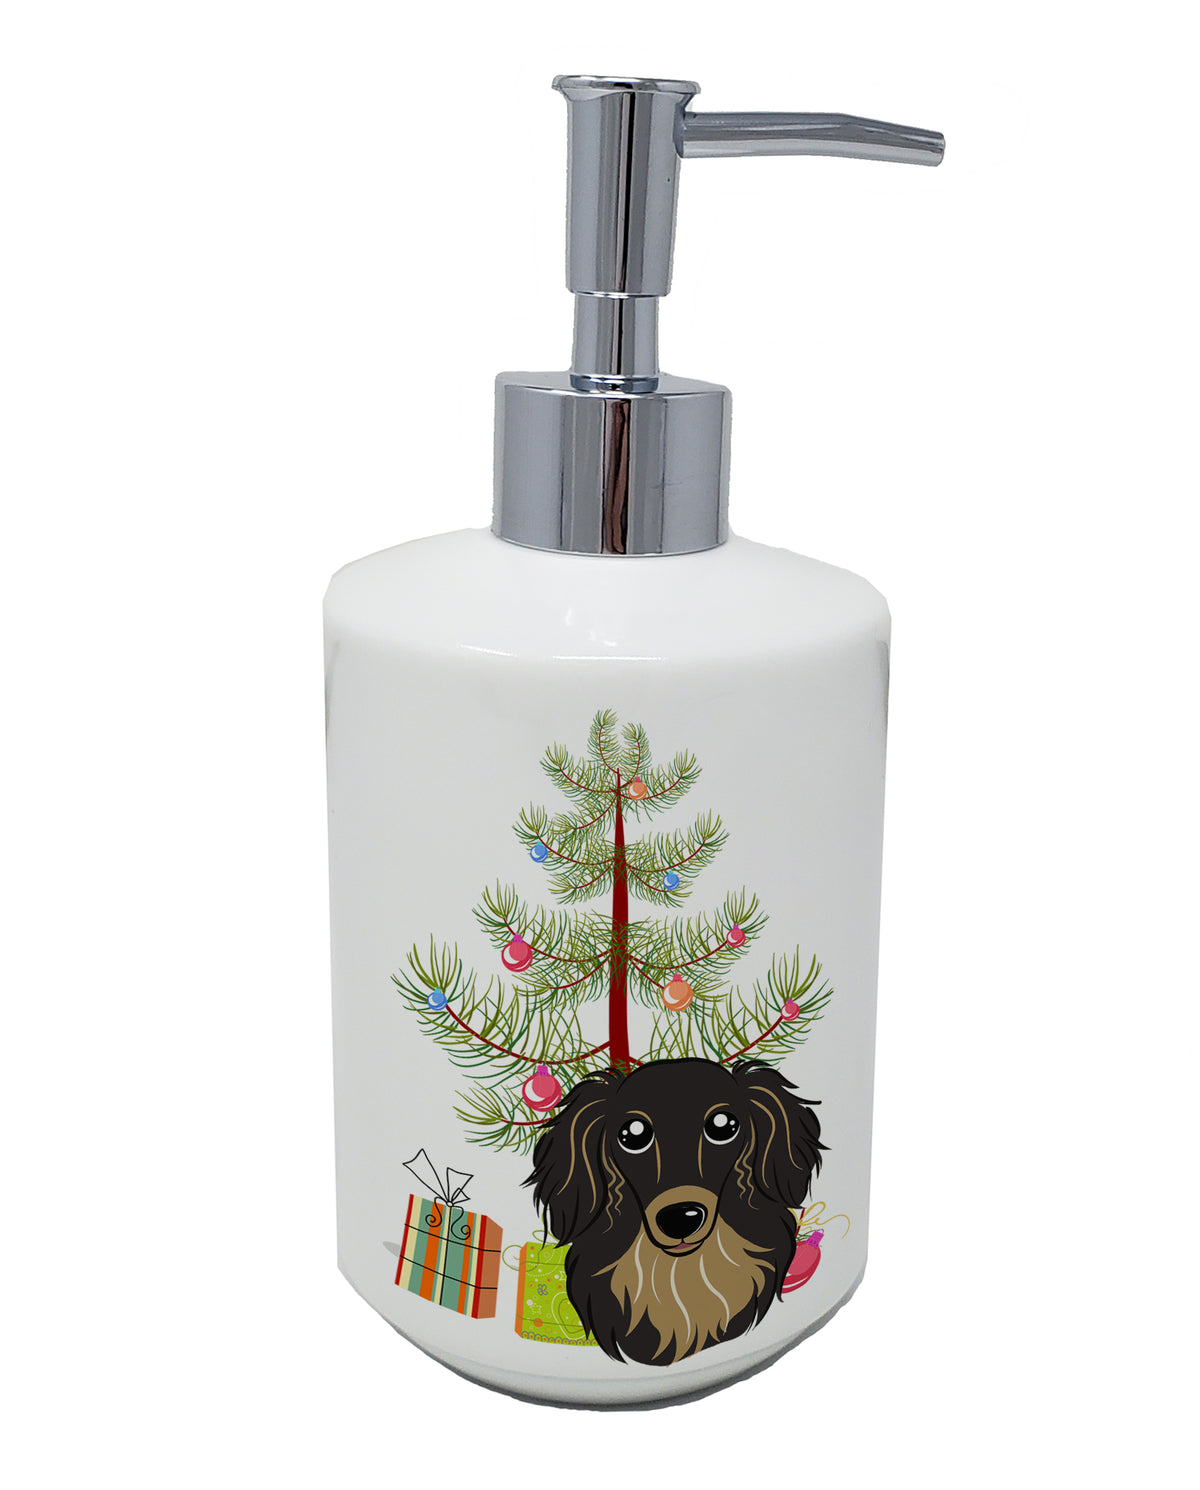 Buy this Christmas Tree and Longhair Black and Tan Dachshund Ceramic Soap Dispenser